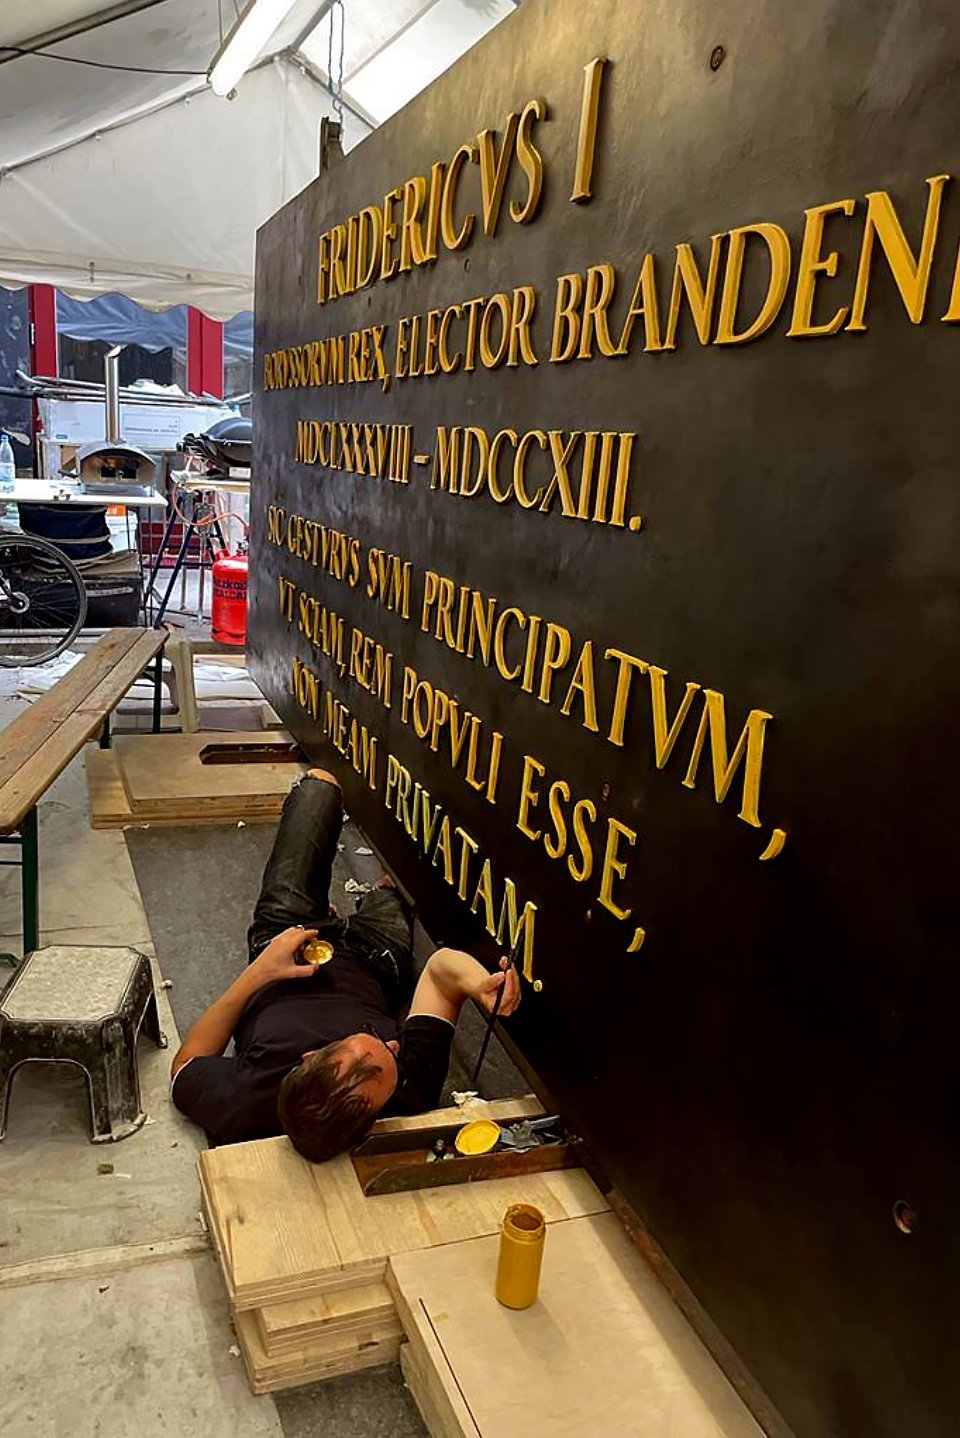 Gilding of the letters on the bronze plaques